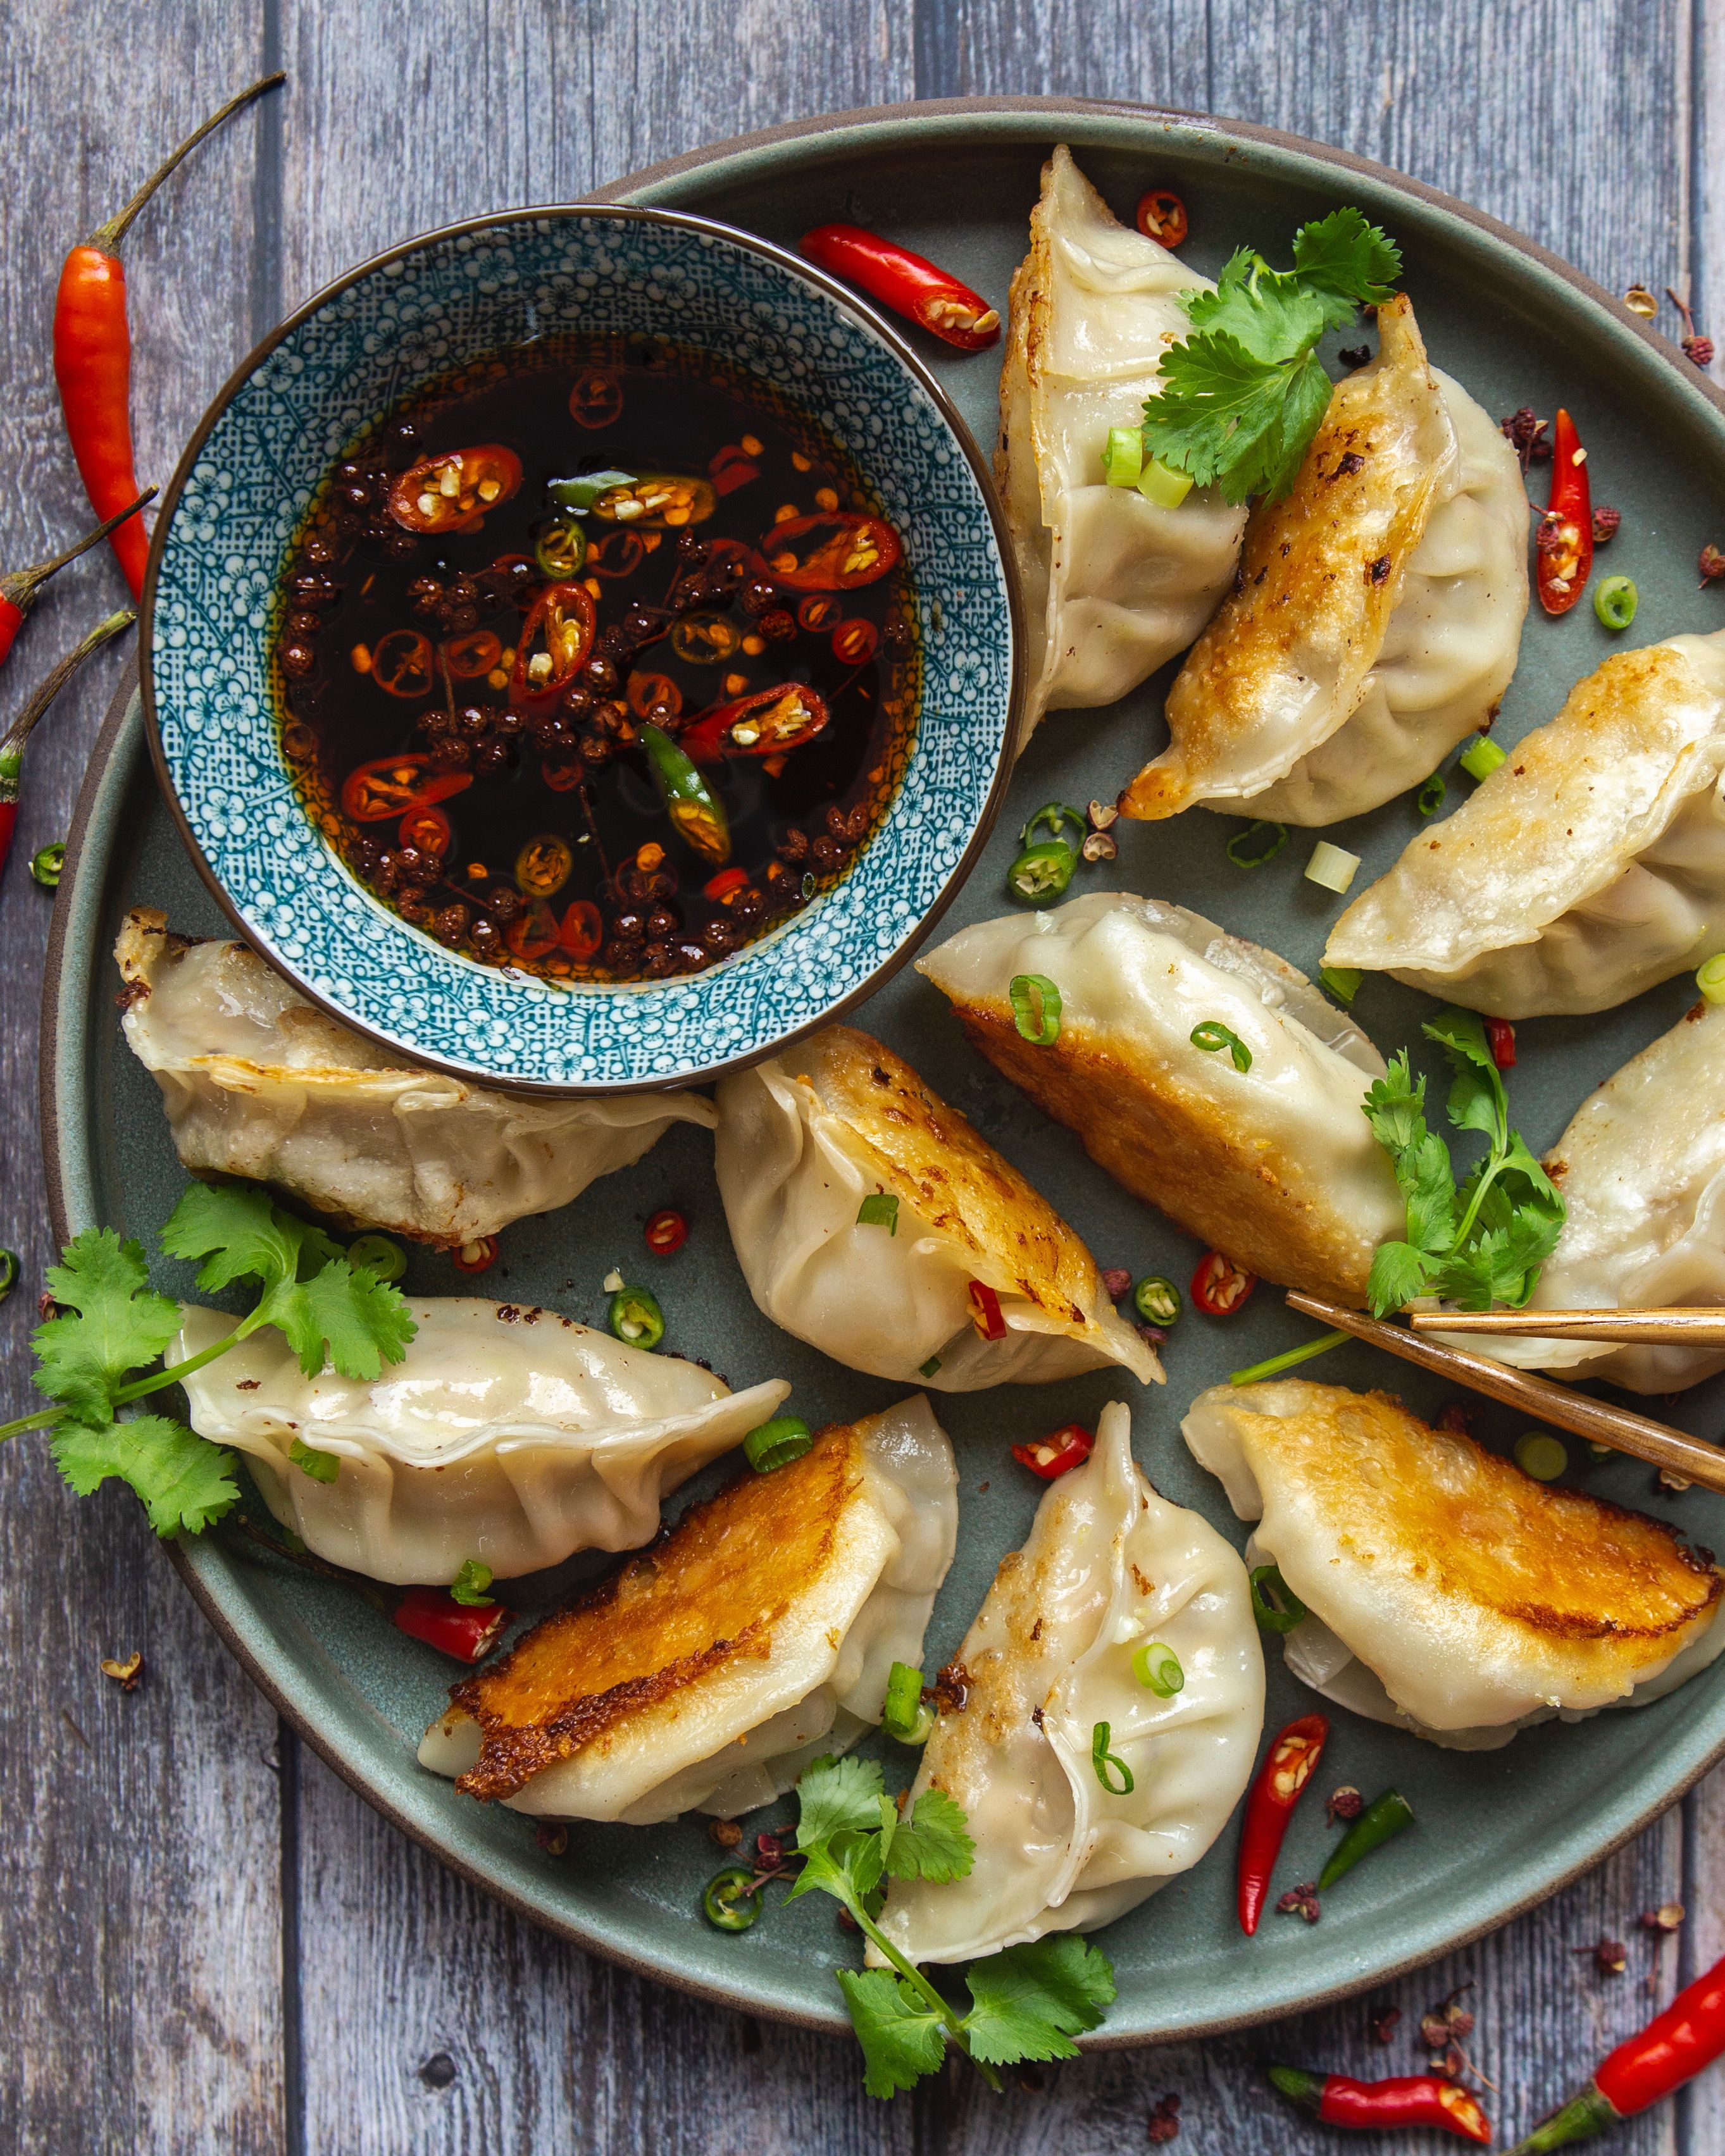 Napa Cabbage, Pork and Shiitake Dumplings with Spicy Soy Dipping Sauce ...